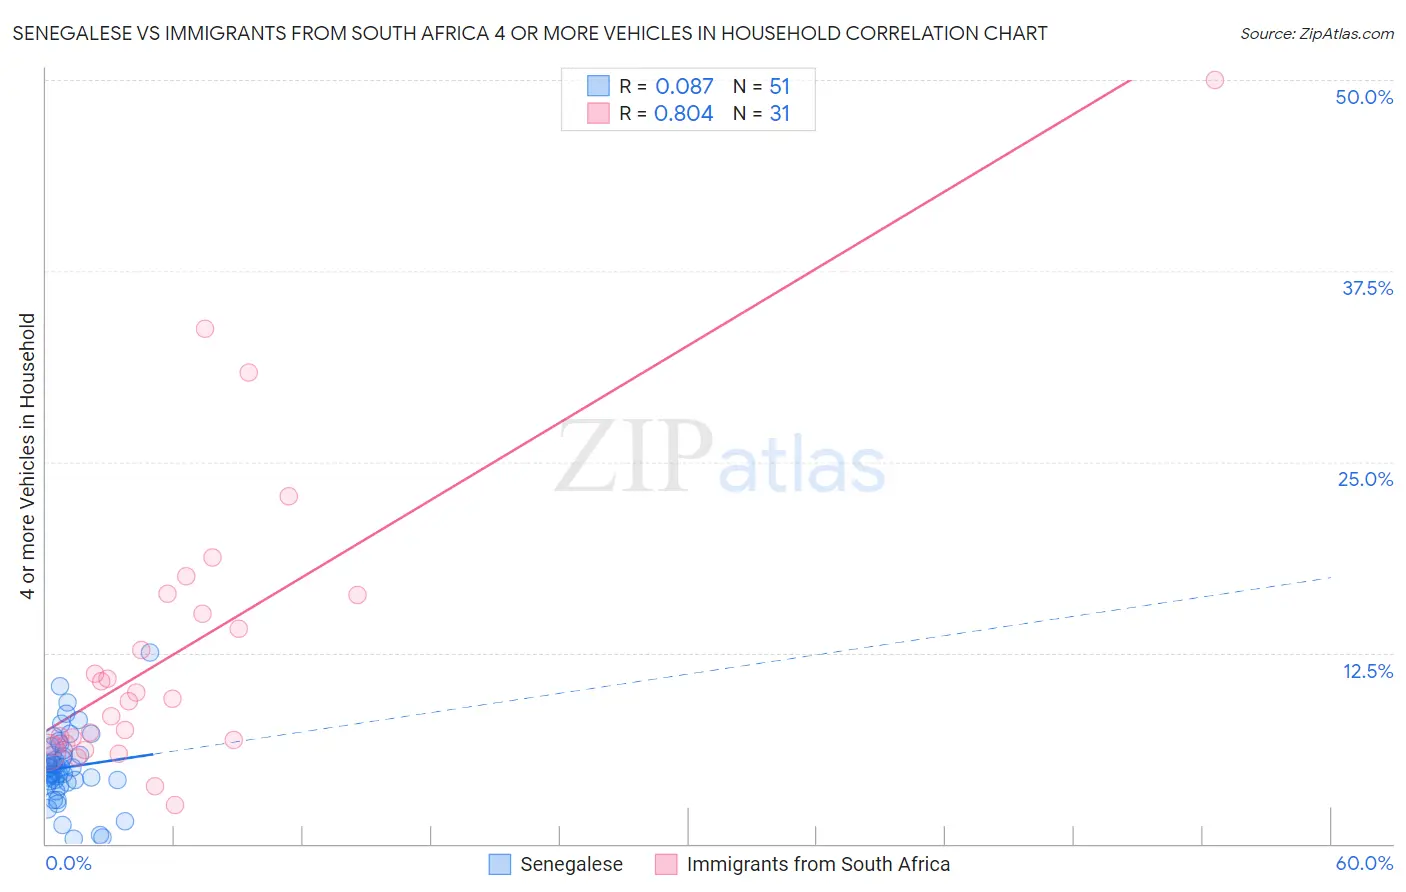 Senegalese vs Immigrants from South Africa 4 or more Vehicles in Household